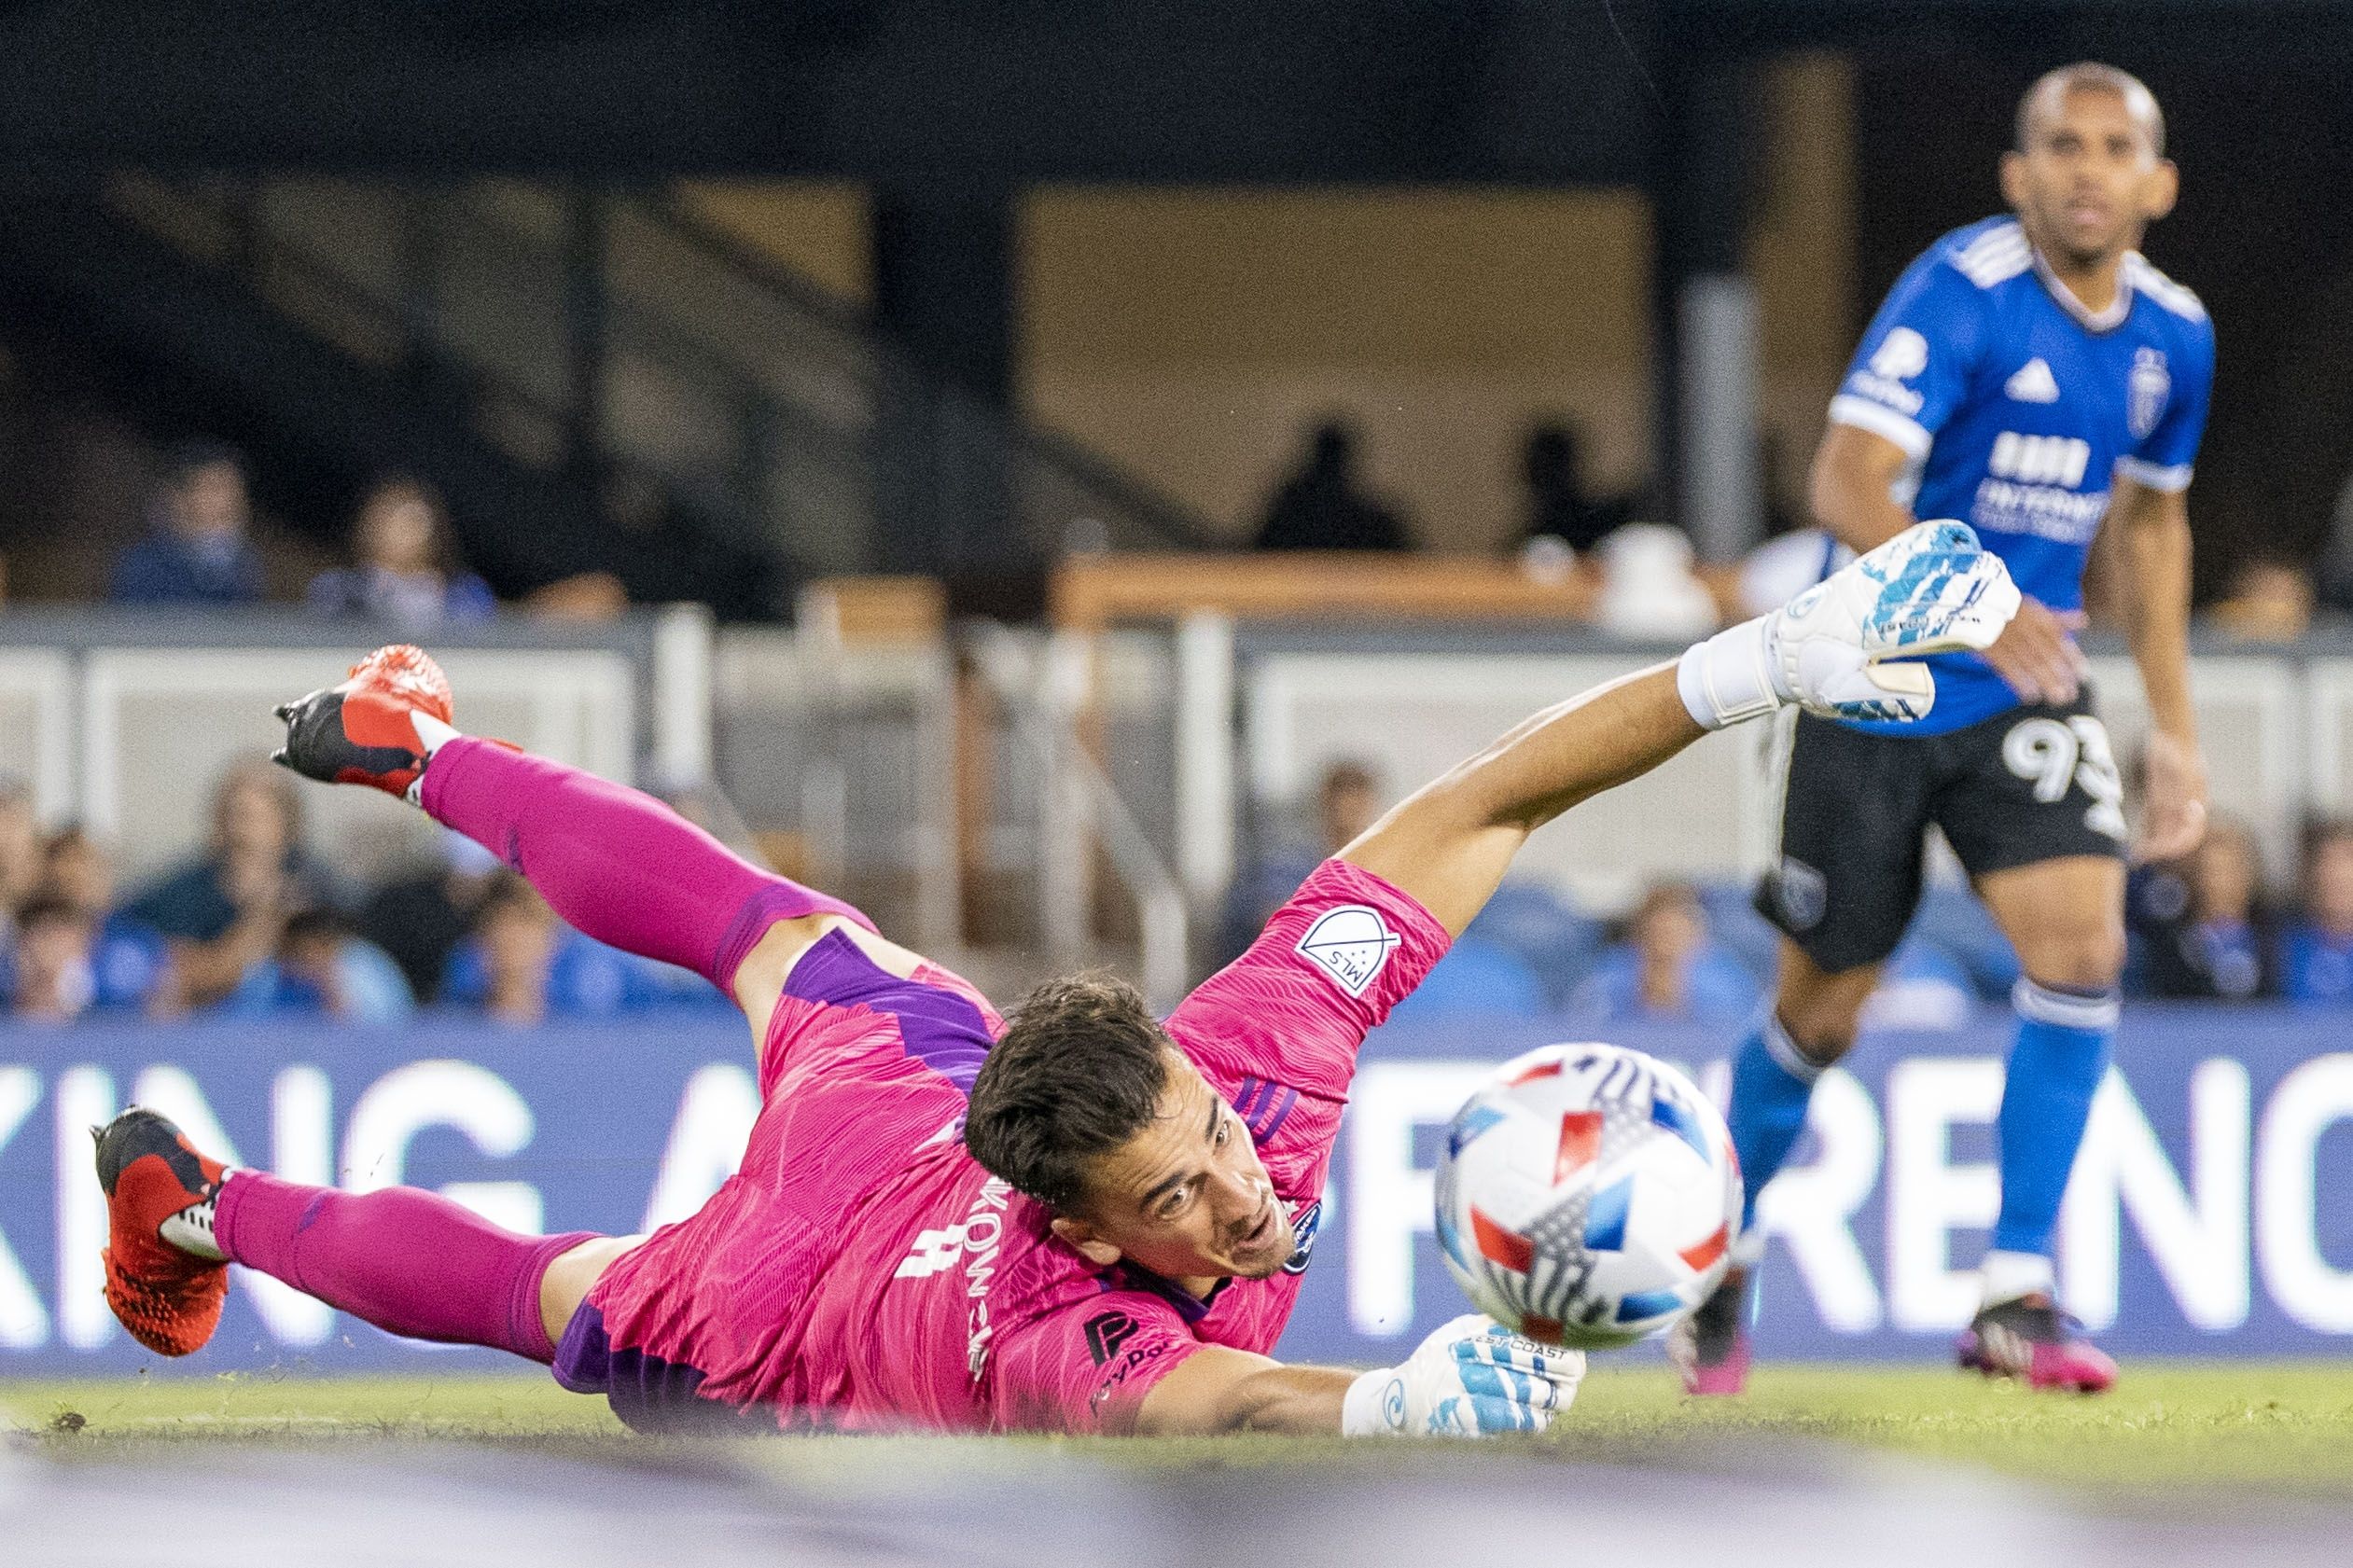 Kyle Terada / USA TODAY Sports; Alpha 9 II, FE 70-200mm GM OSS, F2.8 GM, 162mm, 1/1600, f/2.8, ISO 5000; August 17, 2021; San Jose, California, USA; San Jose Earthquakes goalkeeper JT Marcinkowski (1) makes a save against the Minnesota United during the first half at PayPal Park.